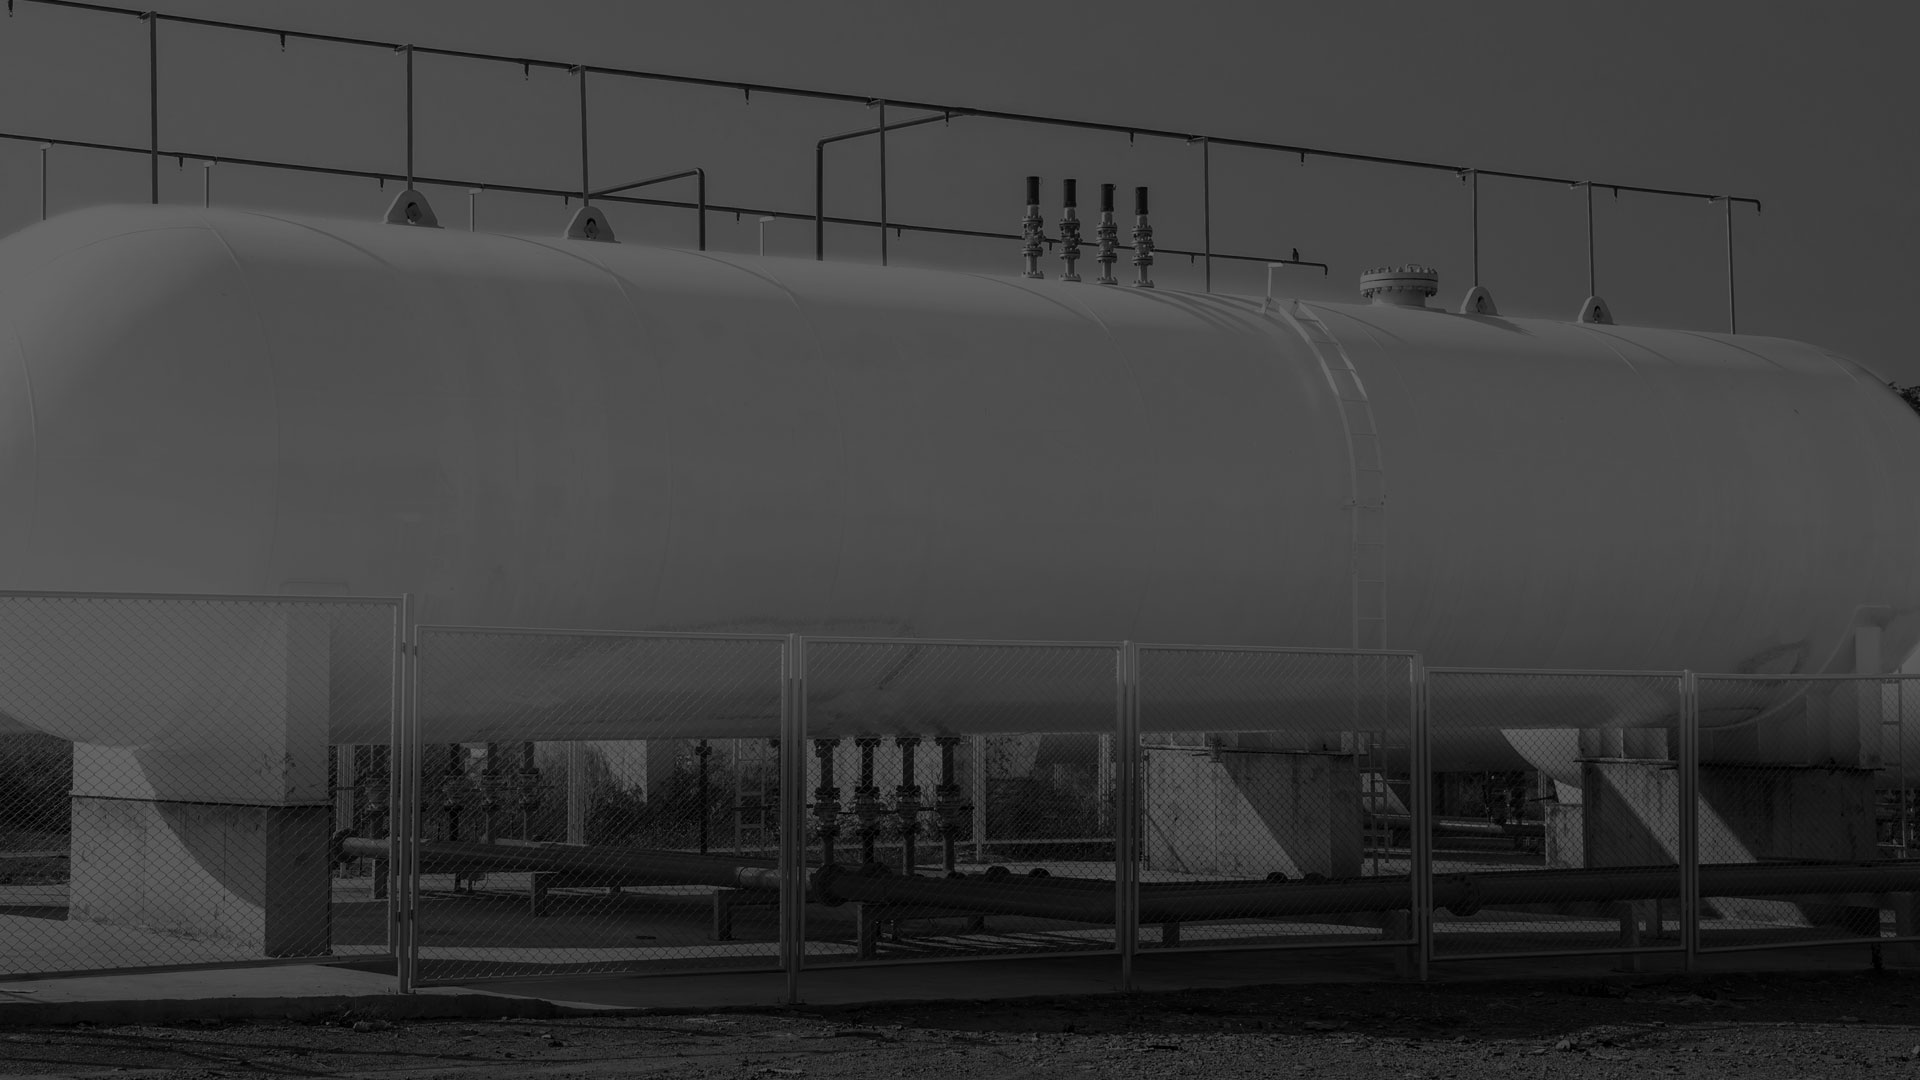 A darkened black and white image of a horizontal tank.